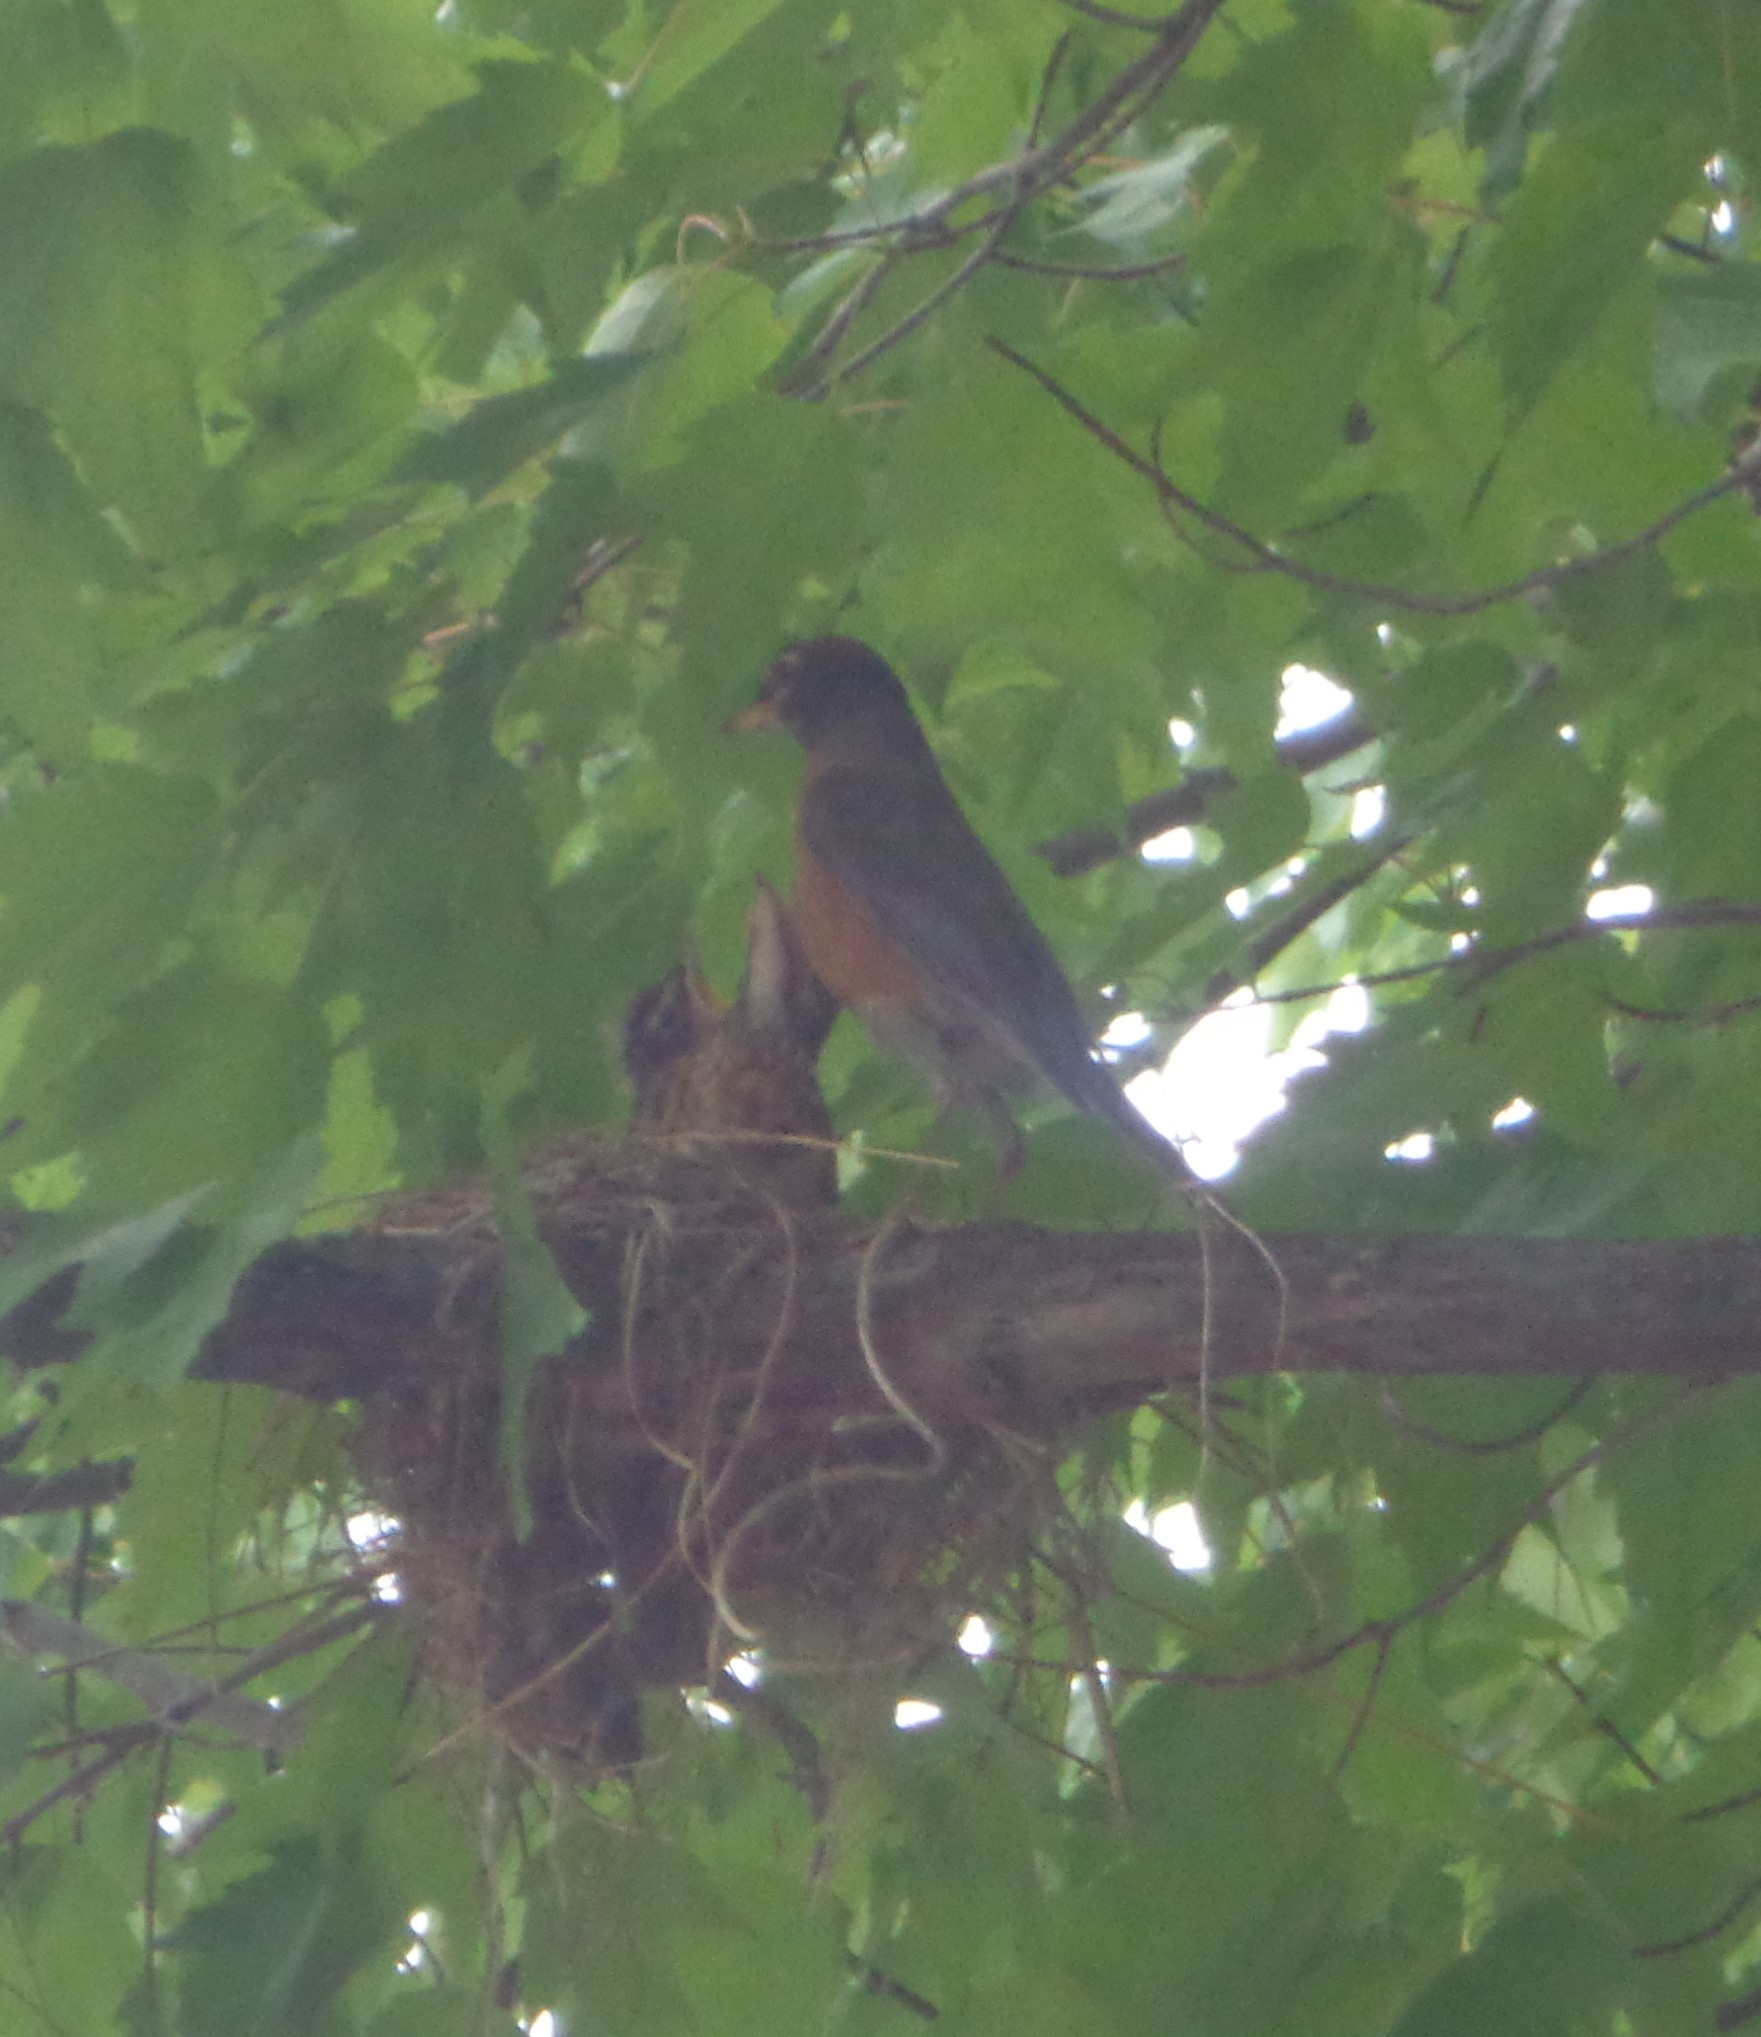 The evening before they flew the nest.